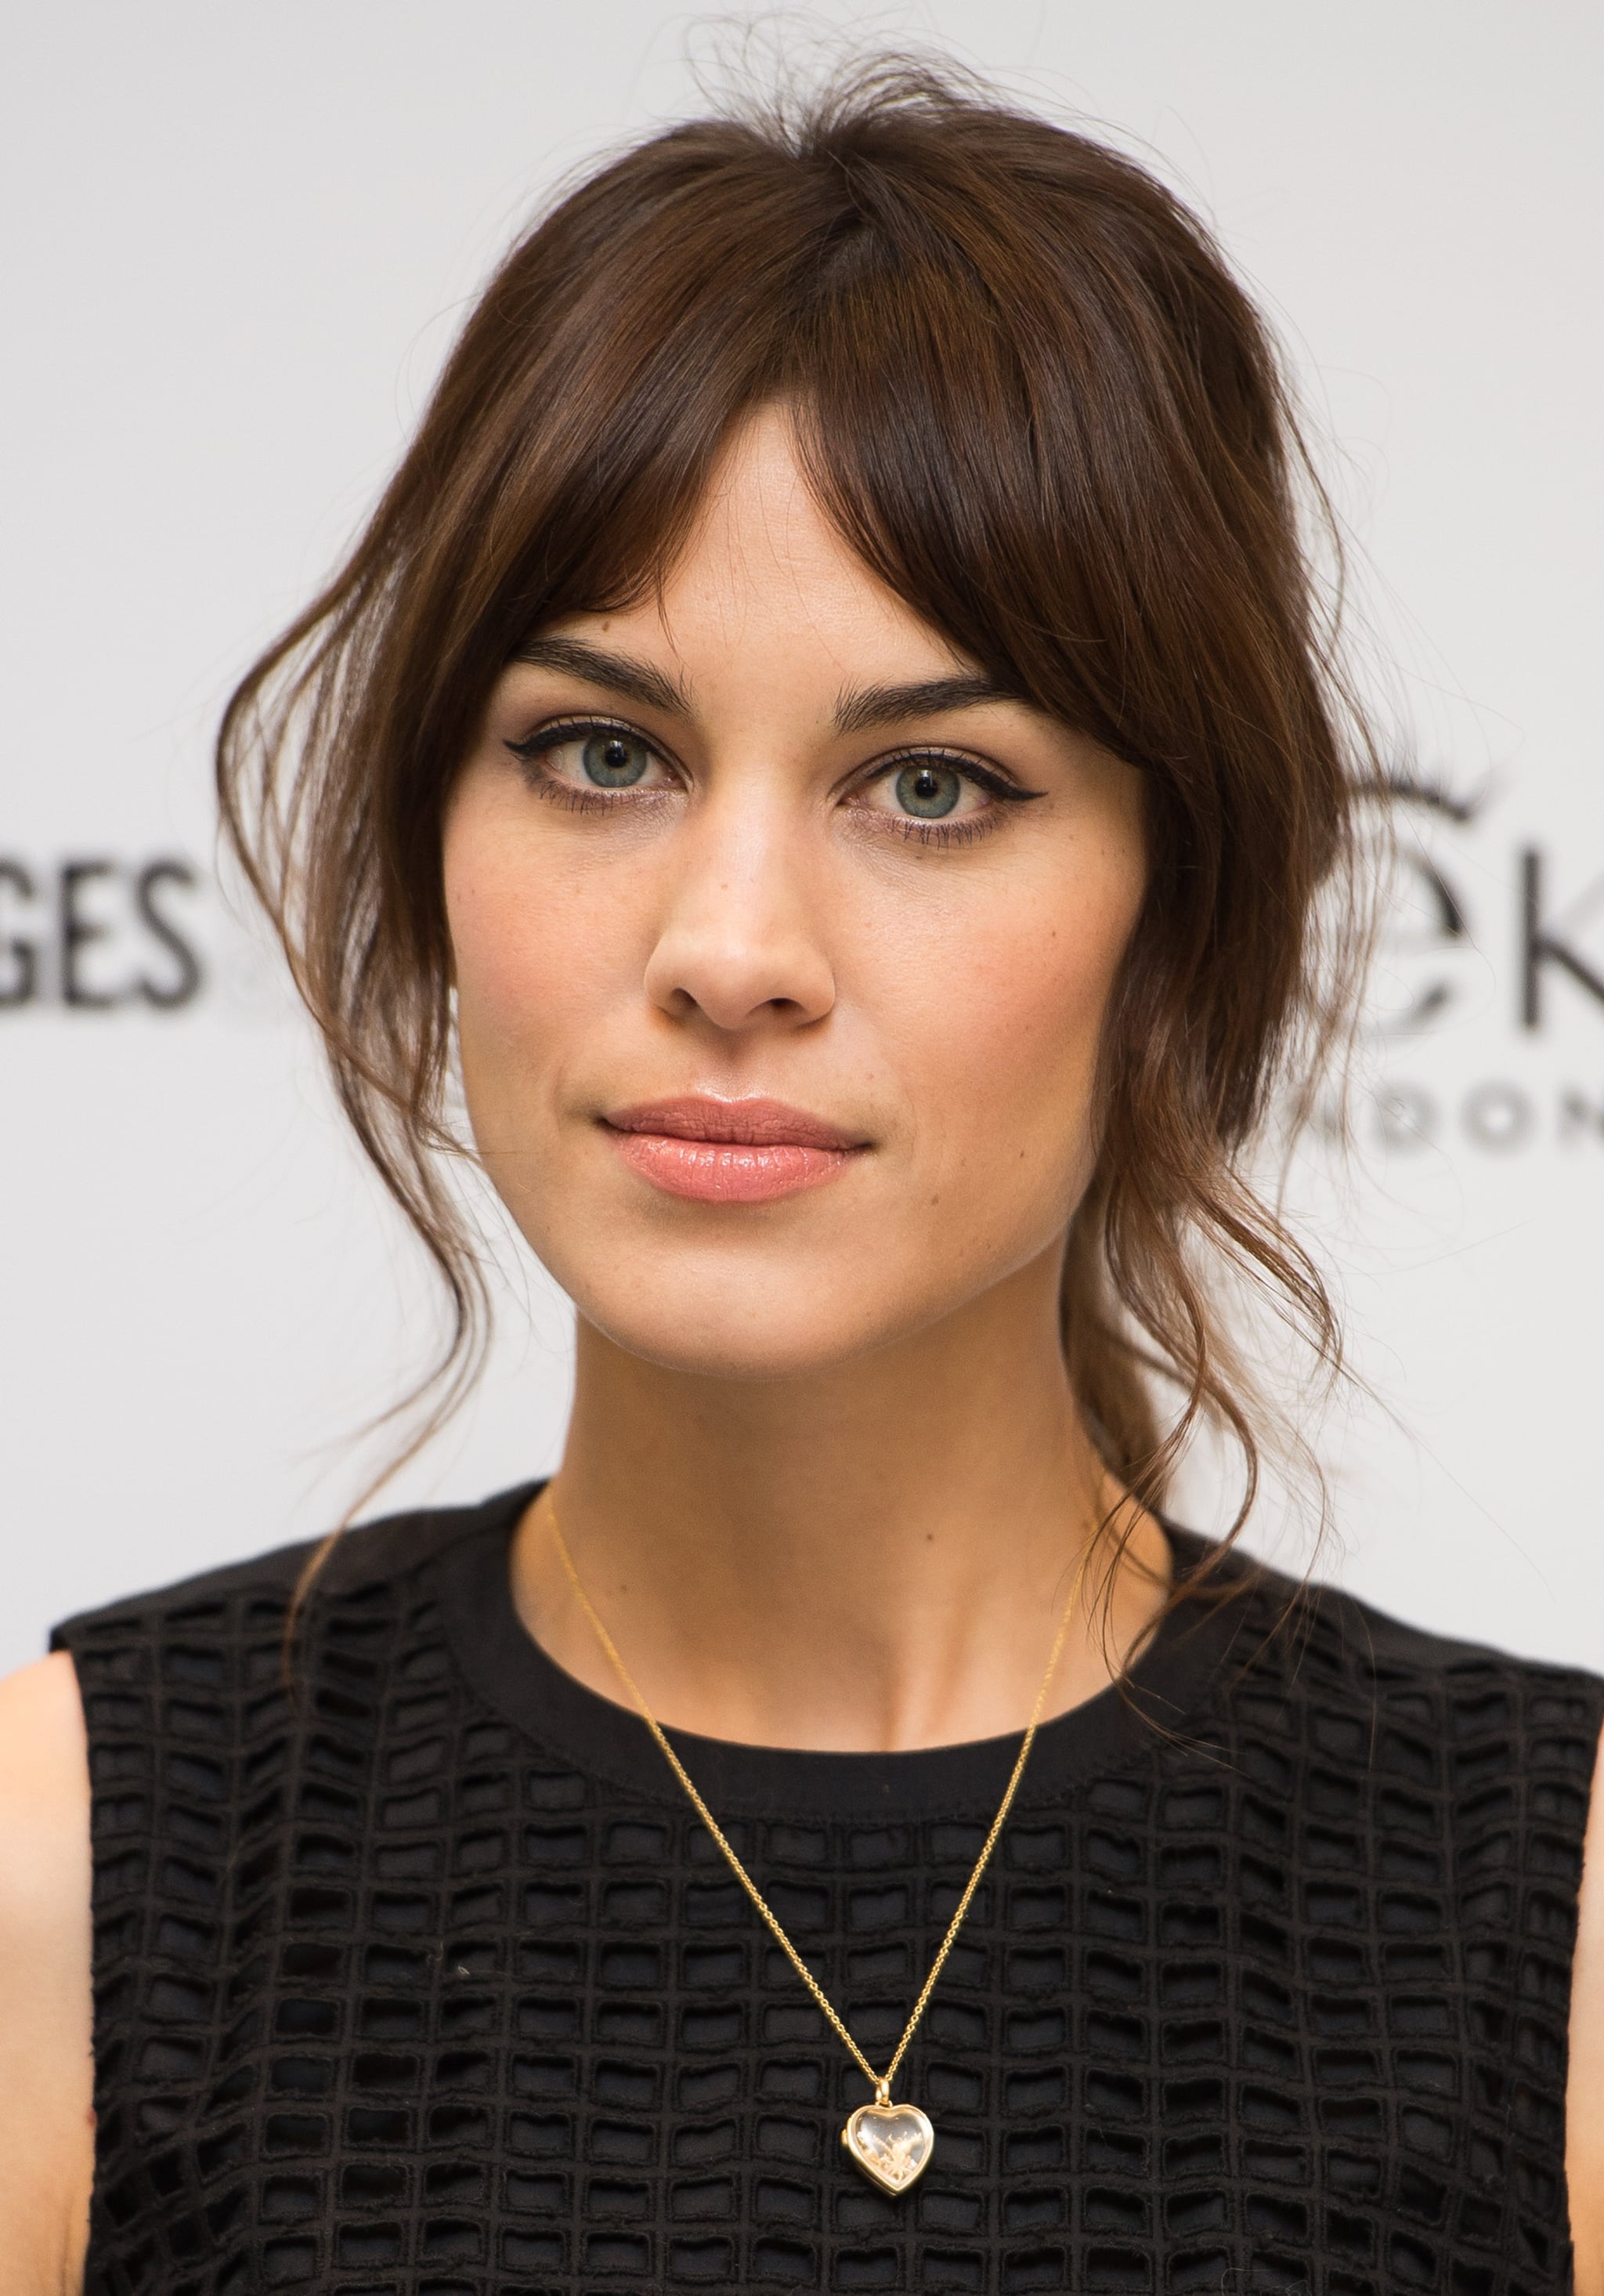 Tips to Grow Out Bangs | POPSUGAR Beauty